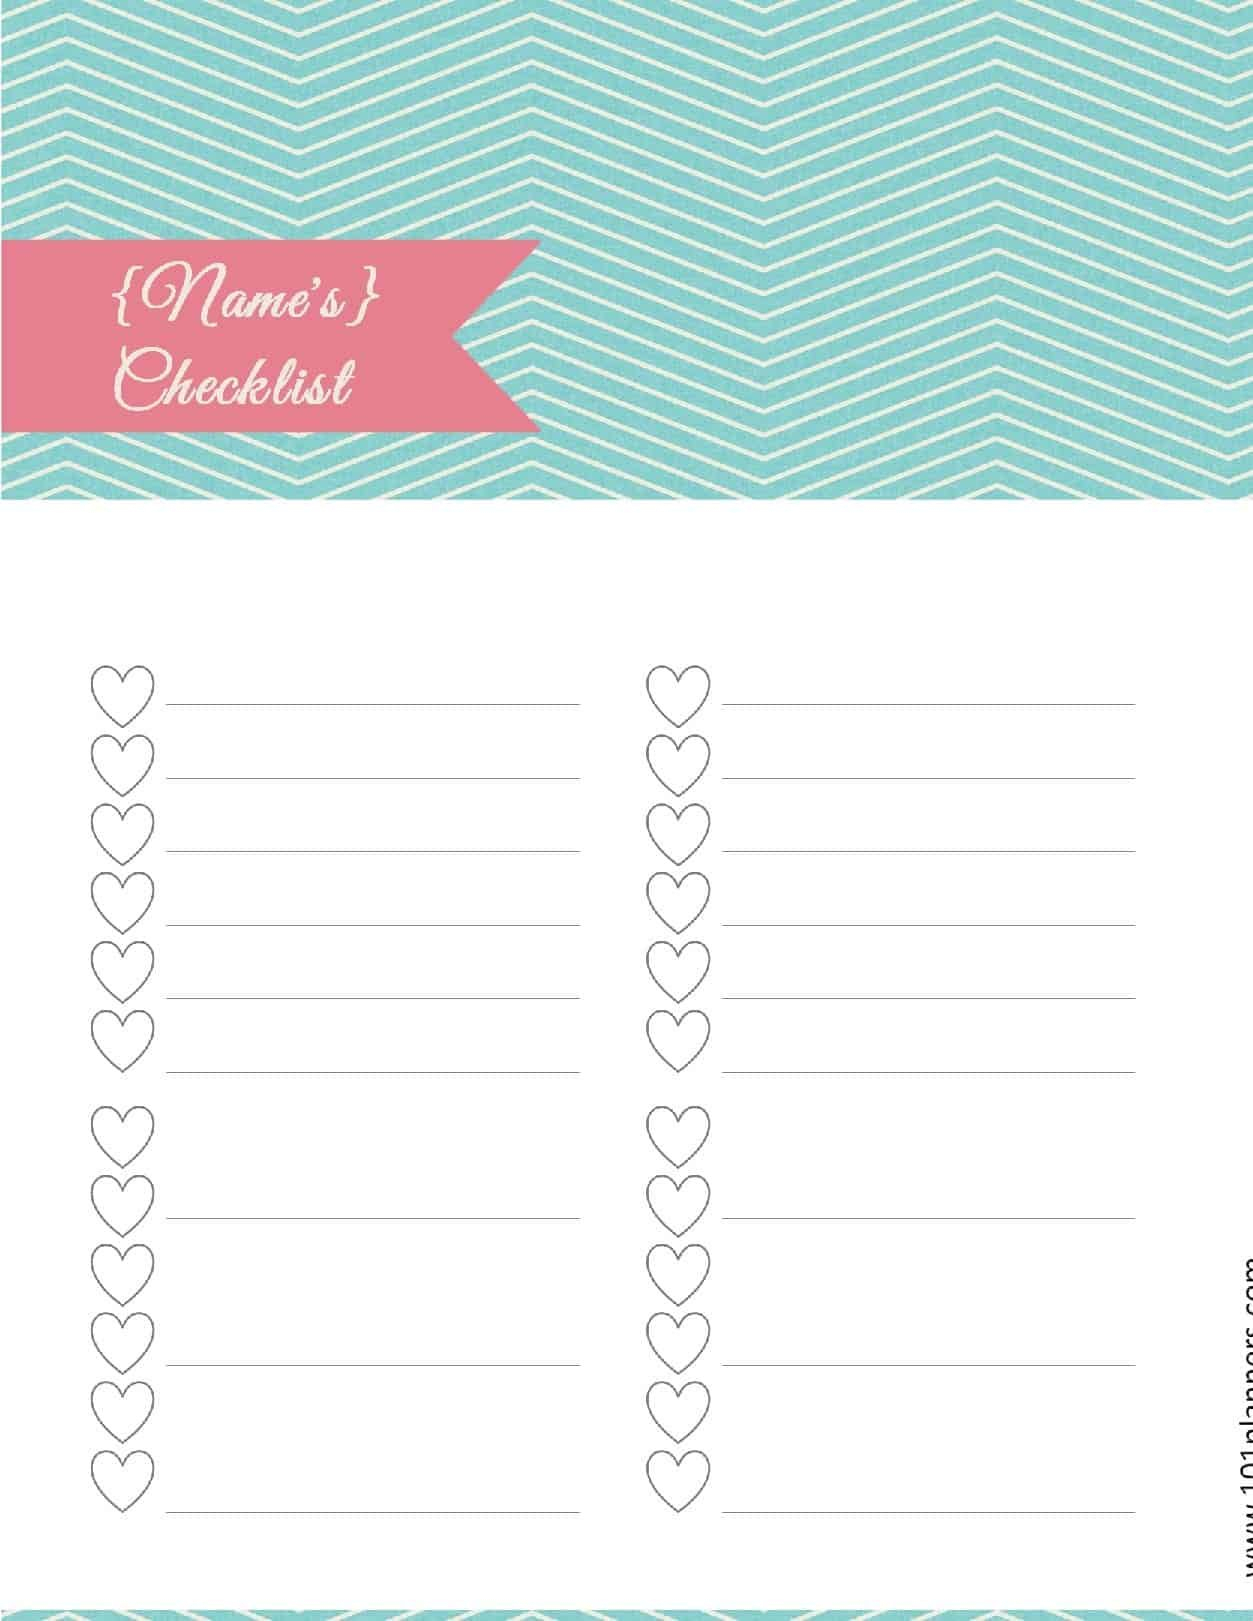 Printable Blank Numbered List Up To 31 :Free Calendar within Blank 31 Day Calendar Template